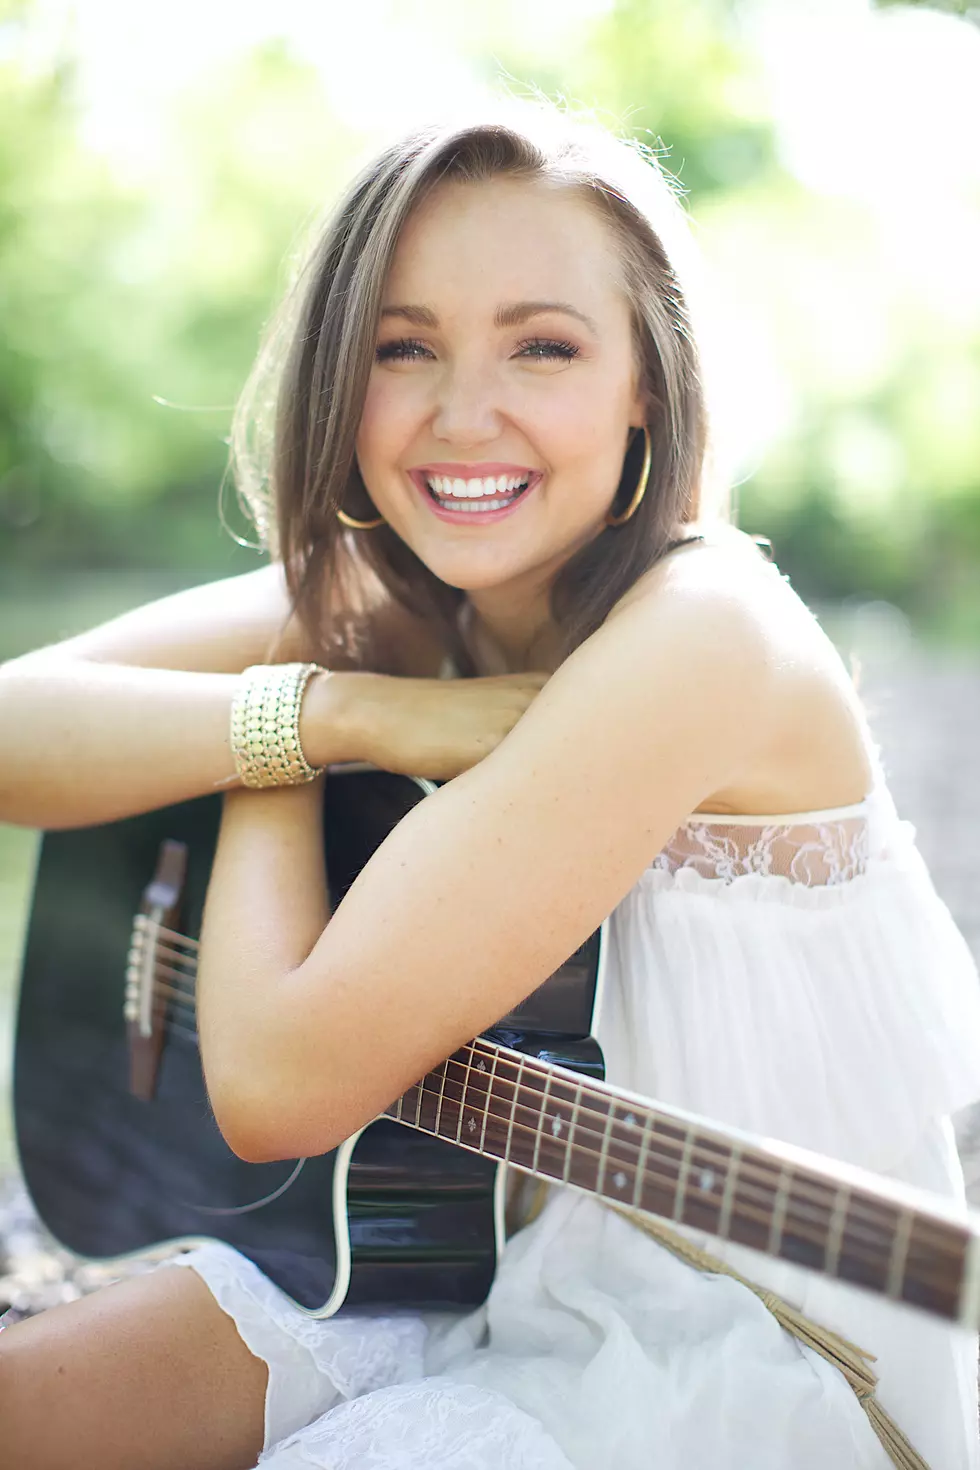 American Idol Contestant And Local Artist Rachel Hale to Open for Joe Diffie at Hope Watermelon Festival